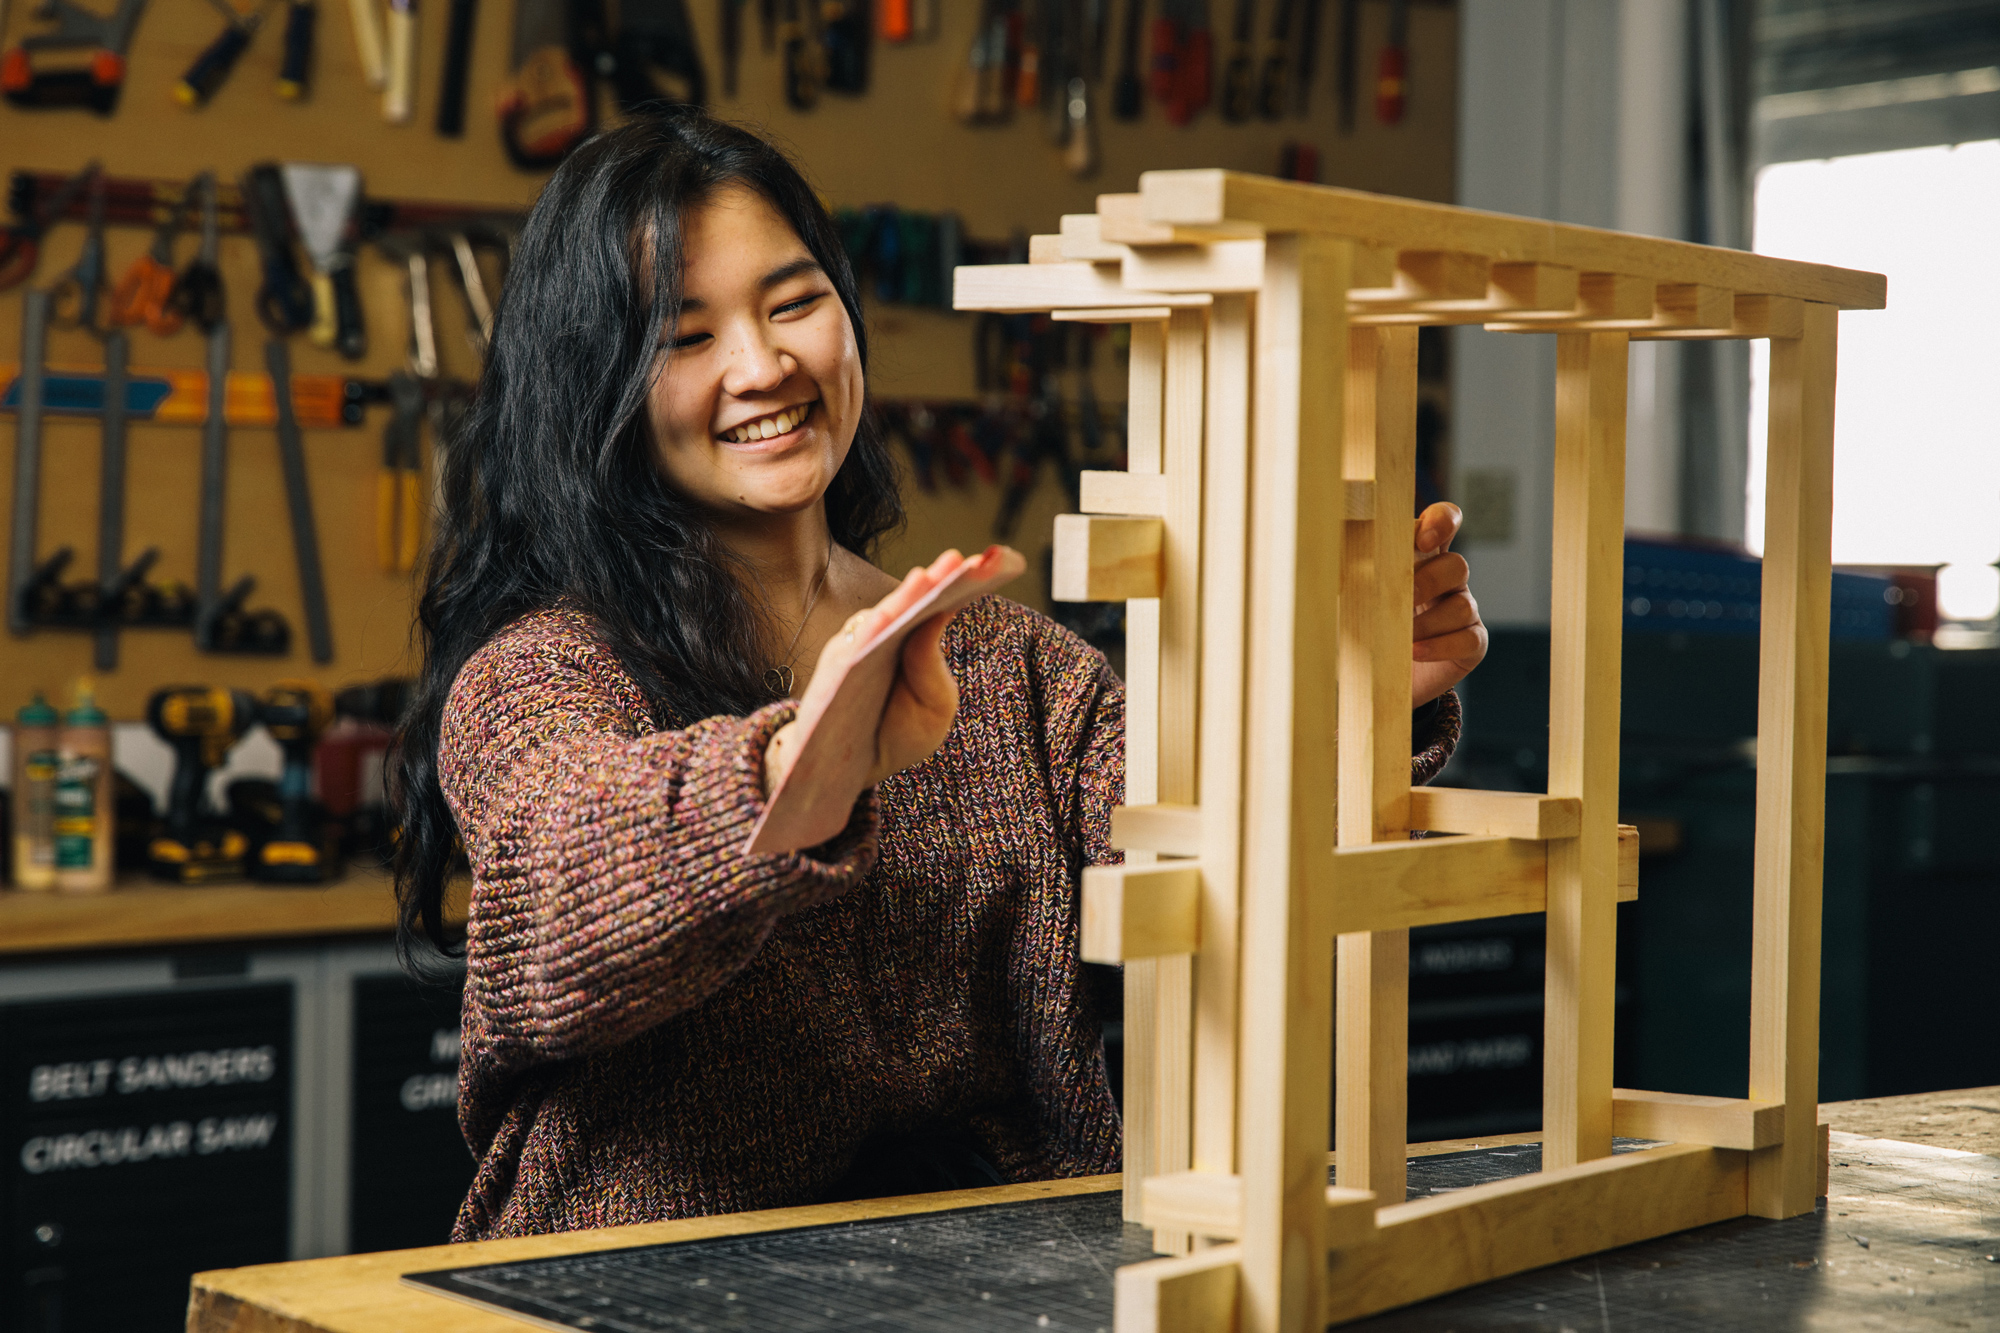 Senior Ibuki Iwasaki double majors in art and design and in computation and cognition. “Design most definitely involves aspects of both humanities and STEM,” she says.